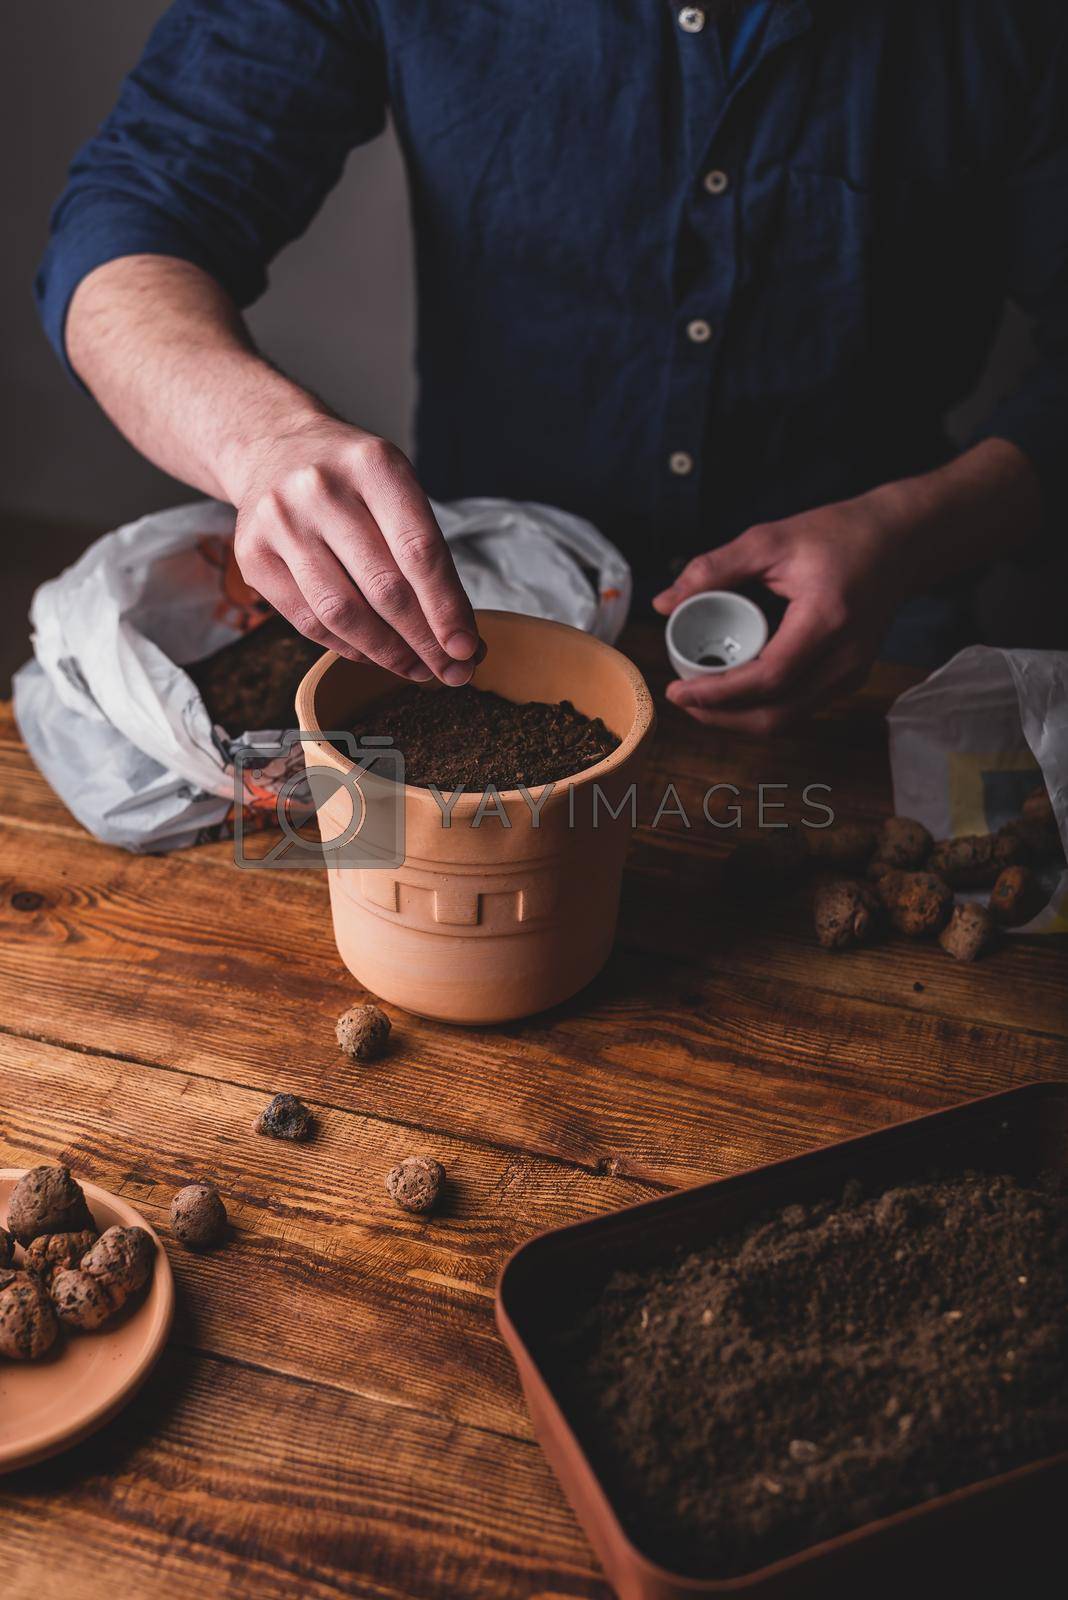 Royalty free image of Man Sowing Thyme Seeds into Terracotta Pot by Seva_blsv